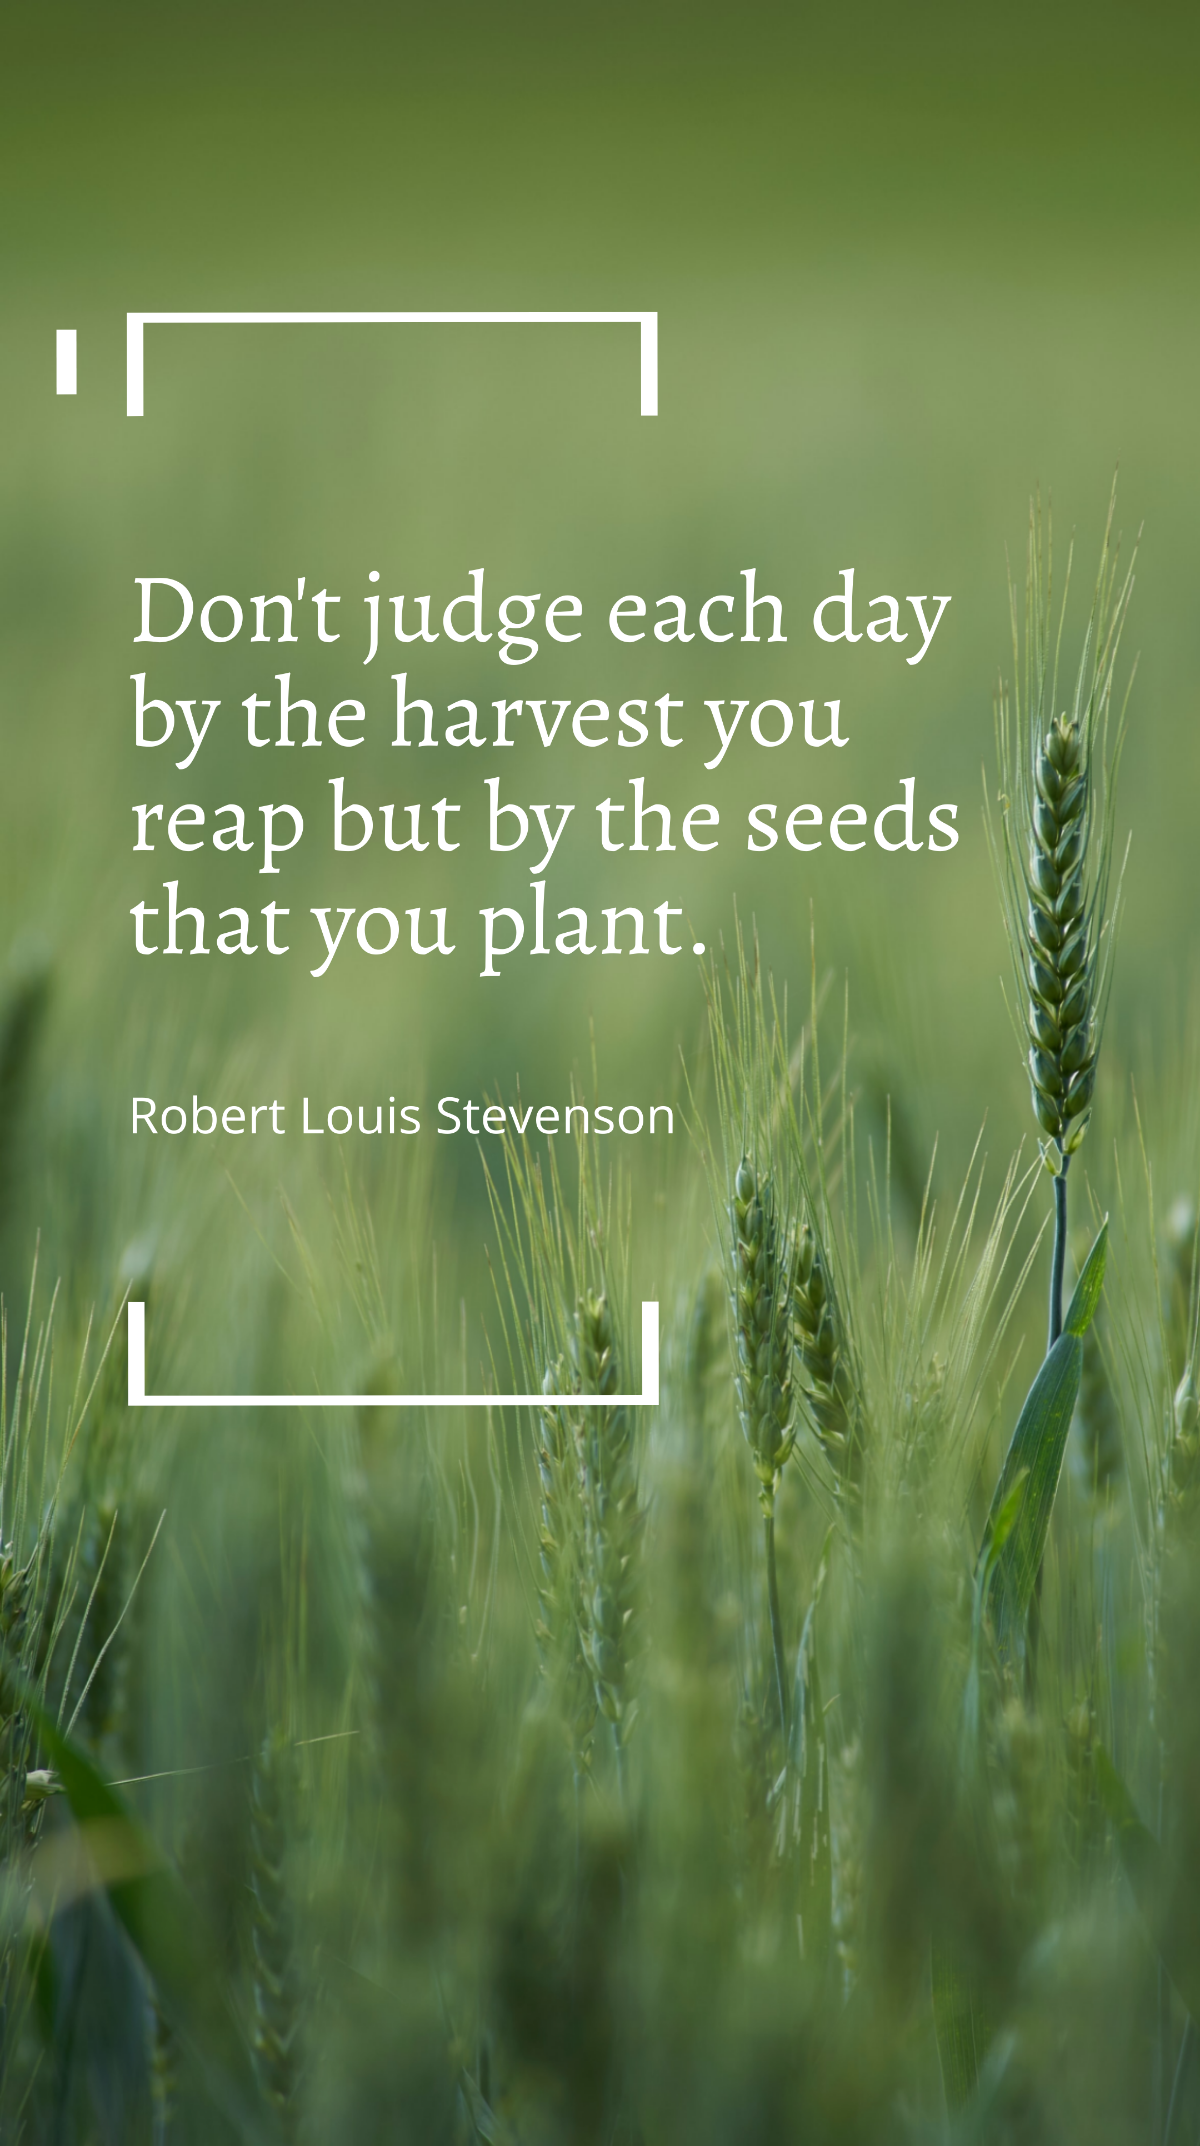 Robert Louis Stevenson - Don't judge each day by the harvest you reap but by the seeds that you plant